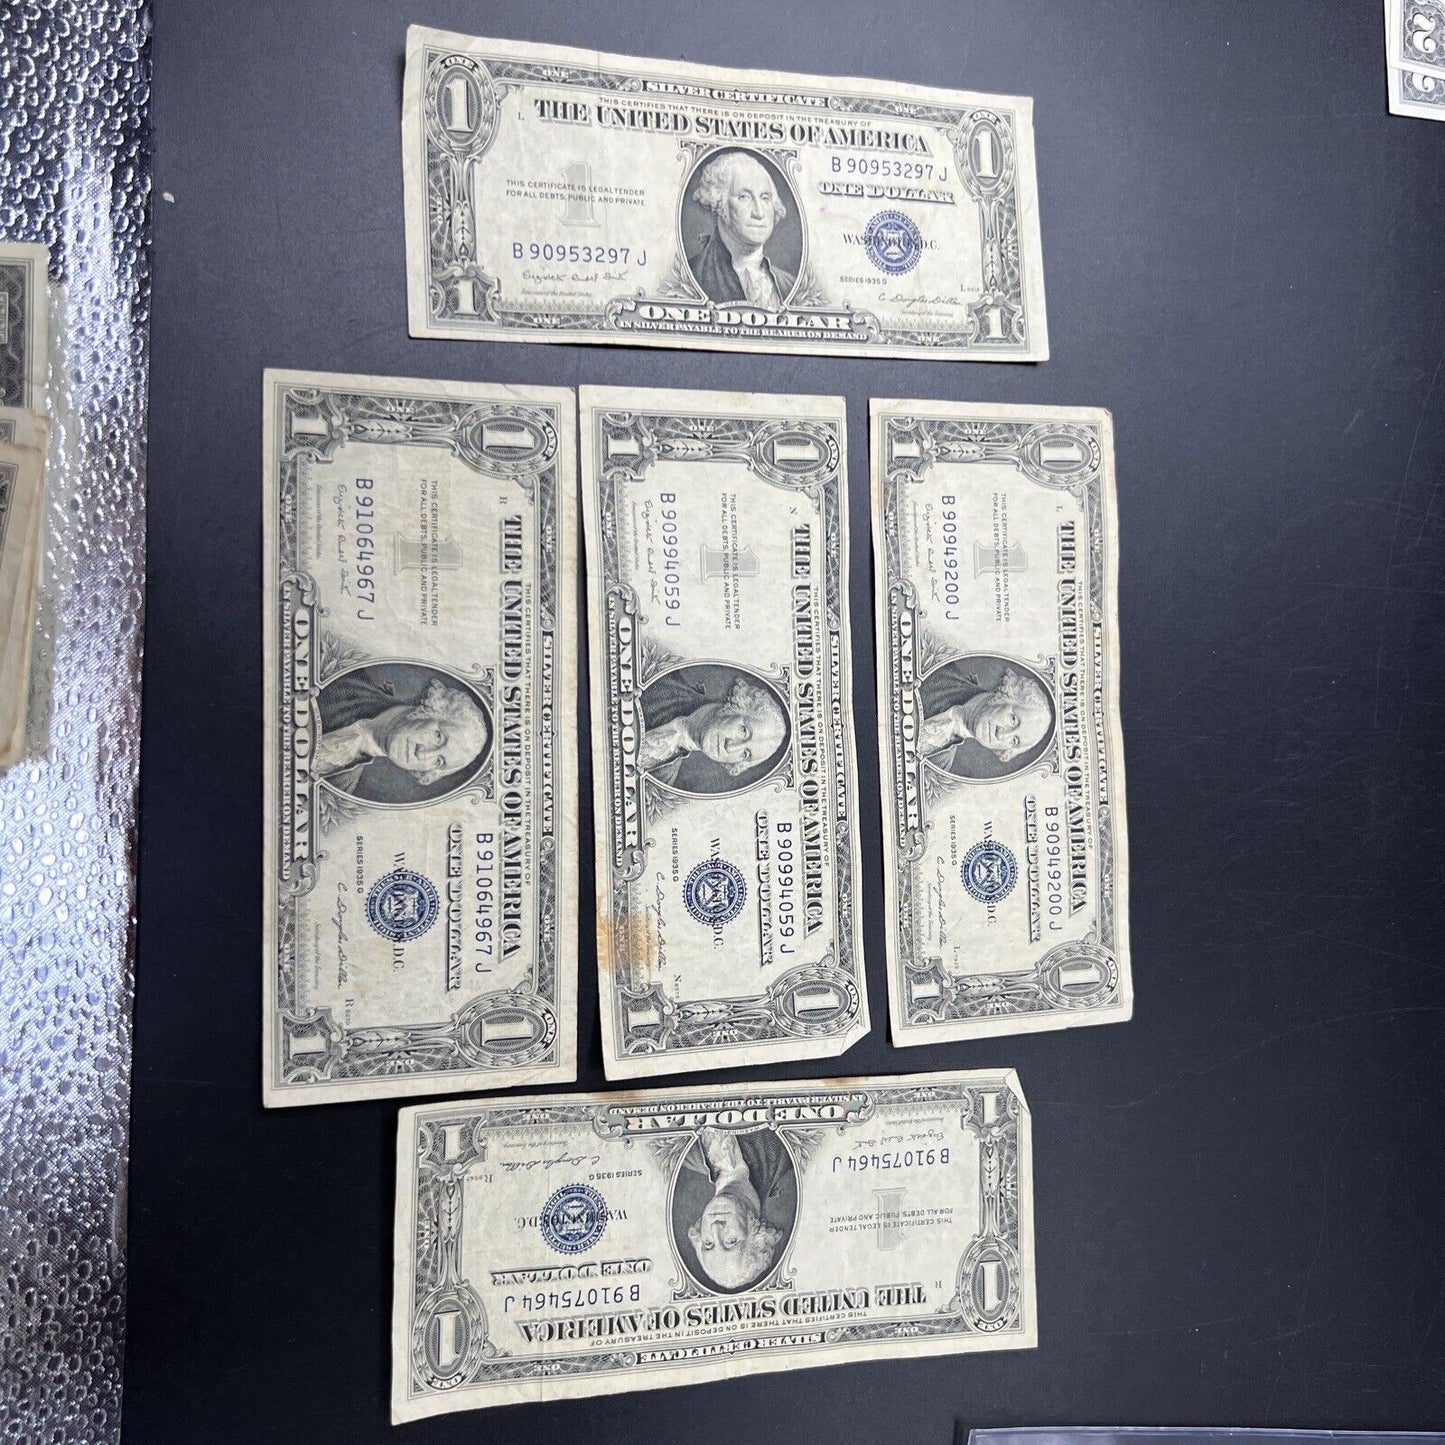 Lot of 5 1935 G $1 Silver Certificate Blue Seal Notes VG Fine Circ Neat Serial #